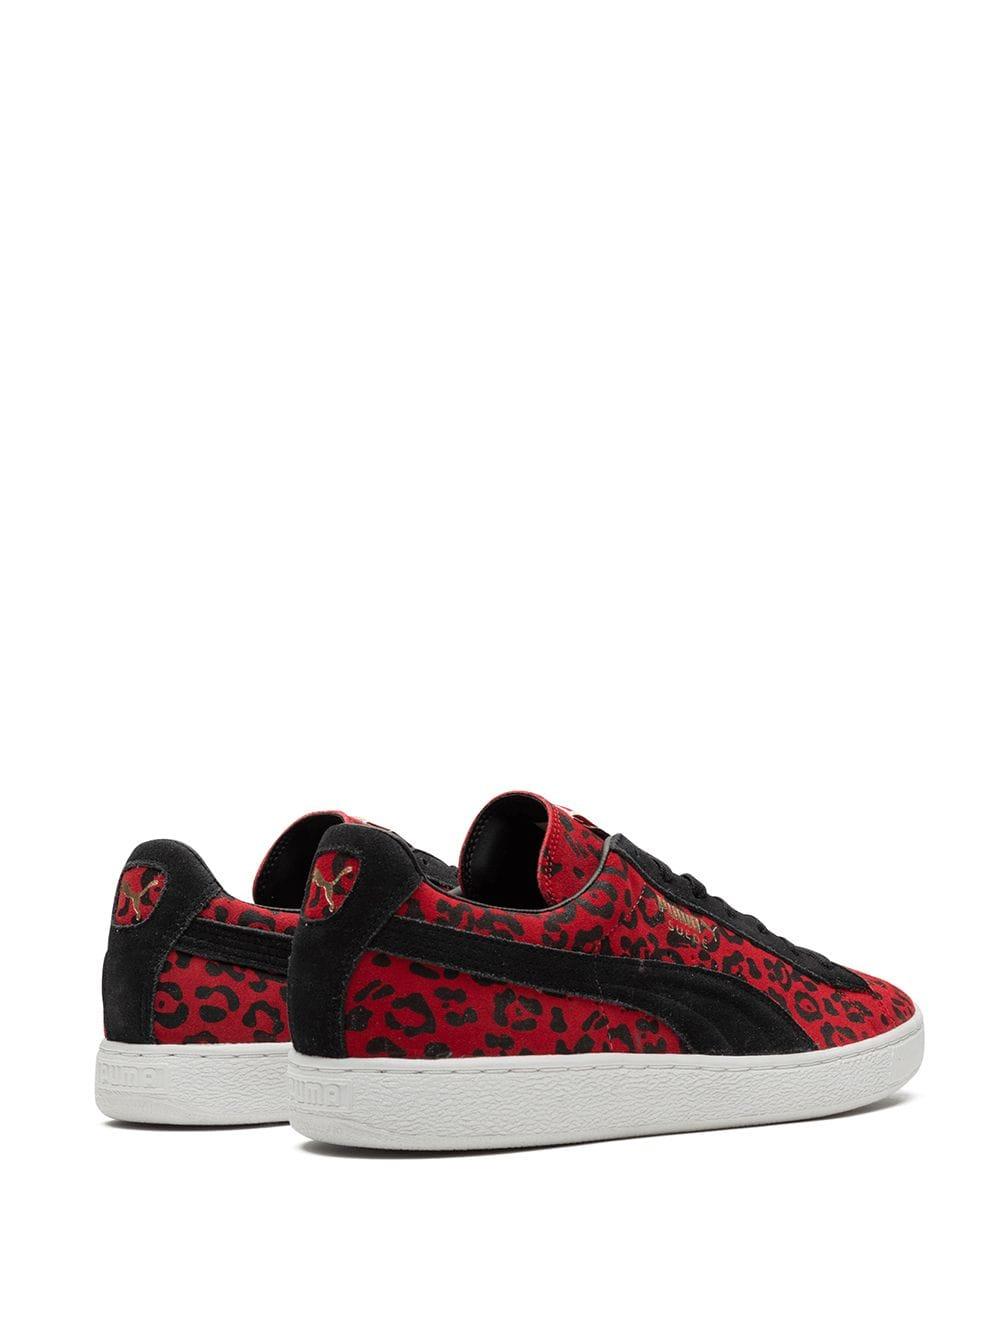 PUMA Lace Leopard Print Sneakers in Red for Men | Lyst